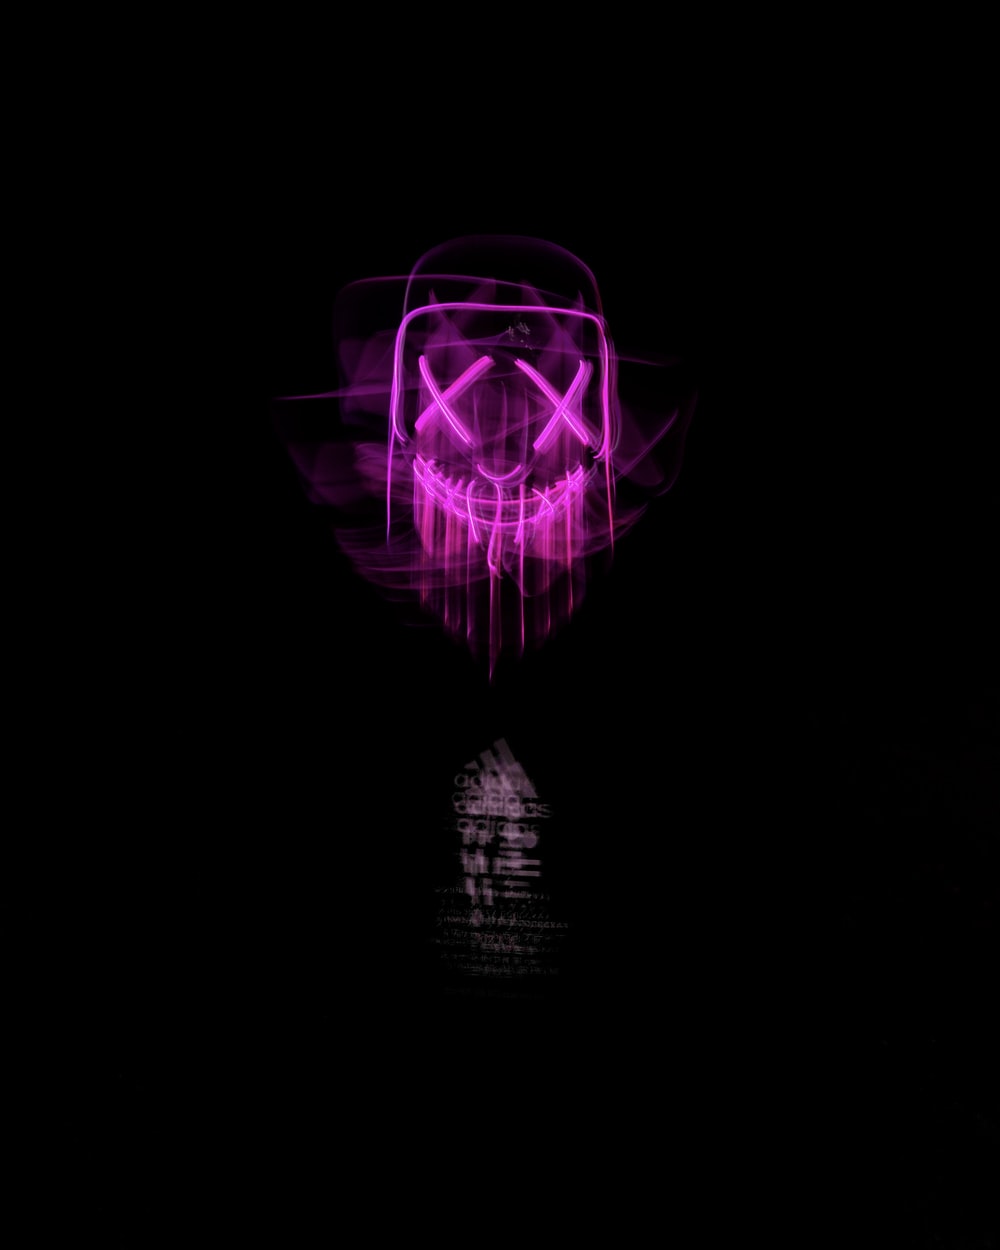 Neon Mask Wallpapers